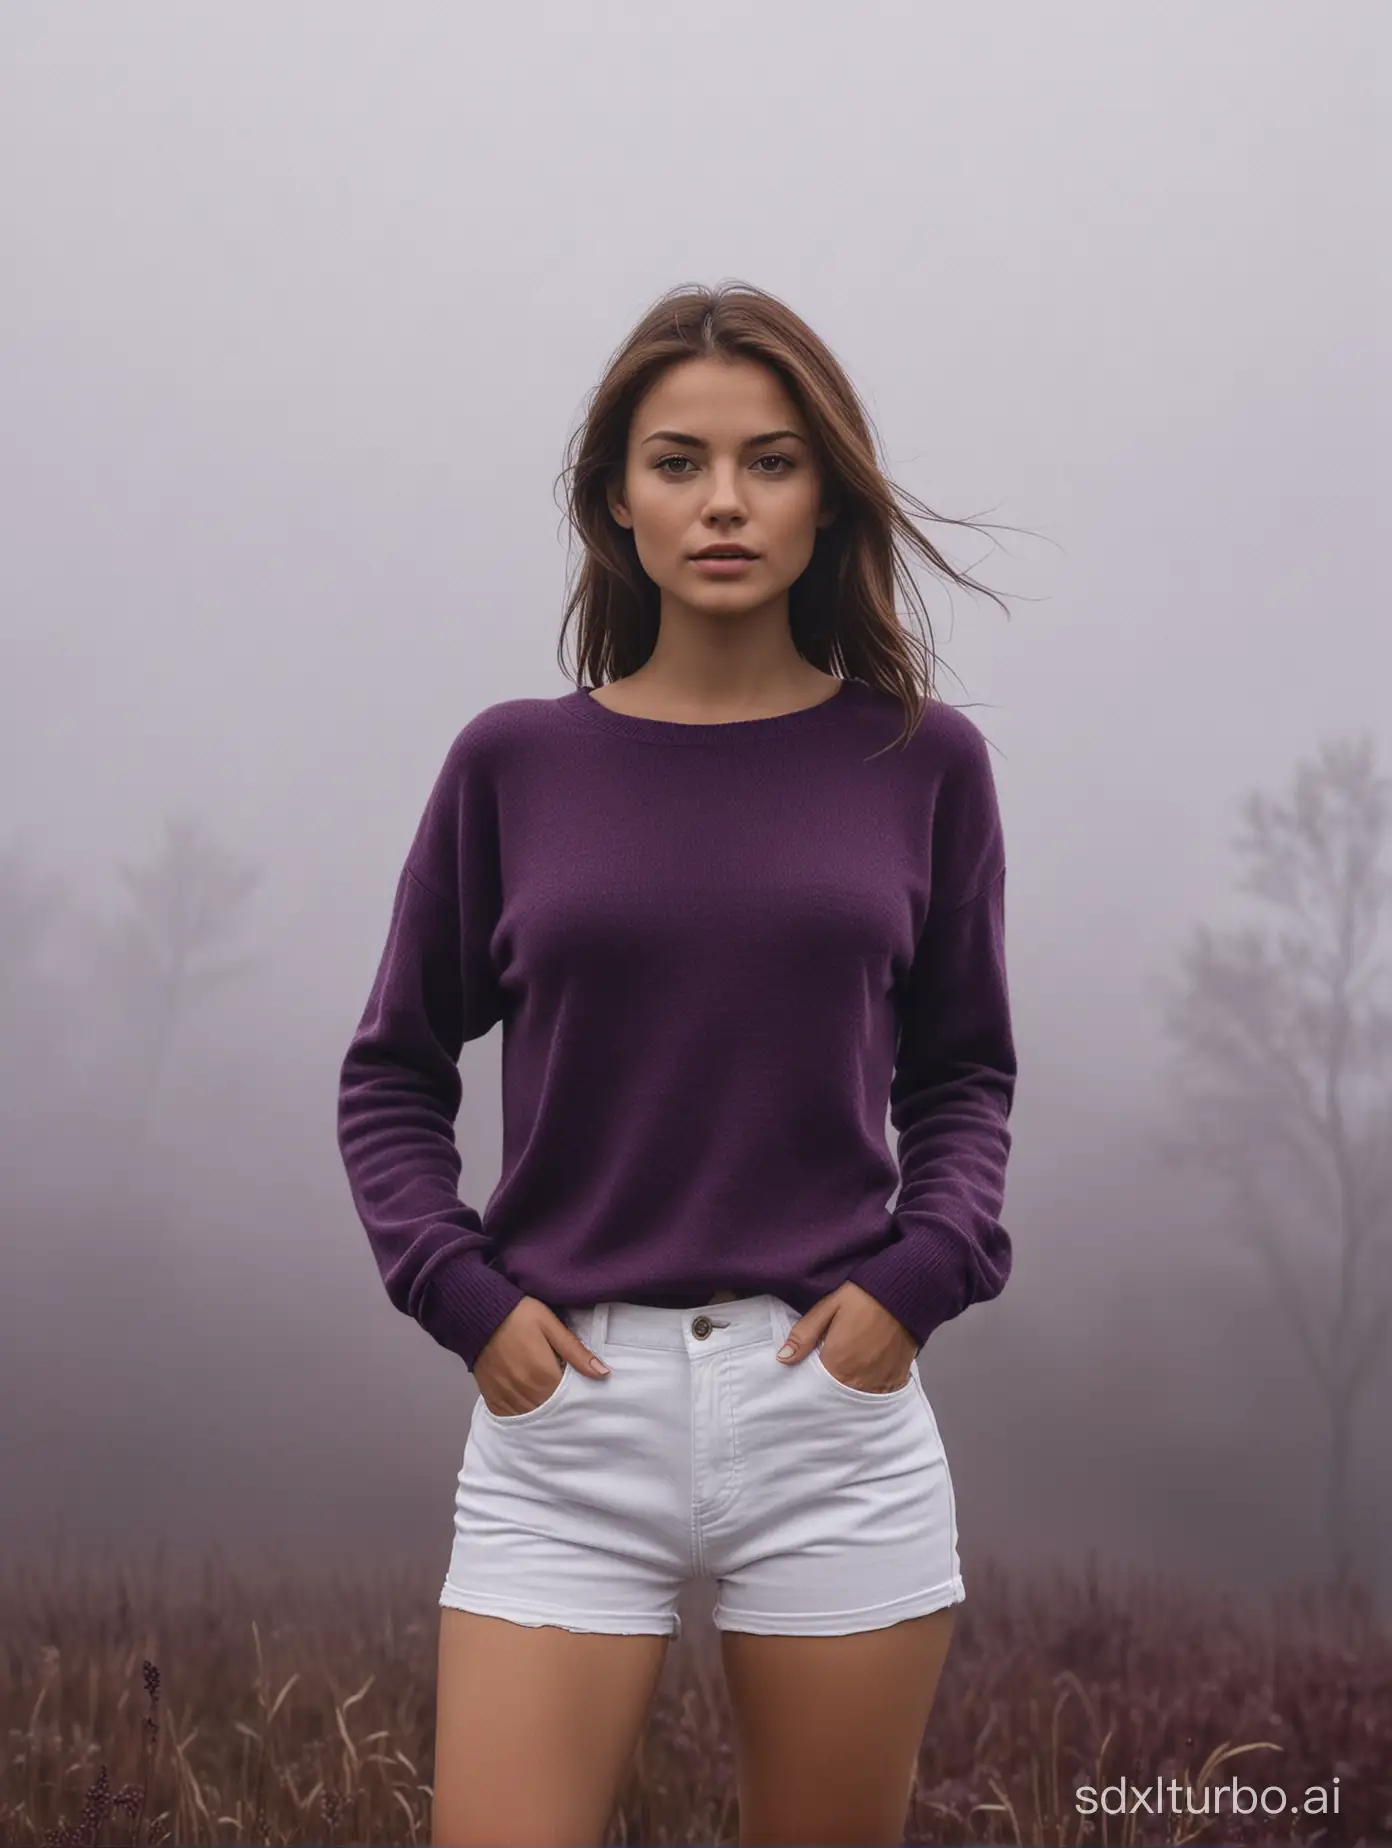 Slim-Woman-in-Dark-Purple-Sweater-and-White-Shorts-Standing-on-Higher-Ground-in-Foggy-Clearing